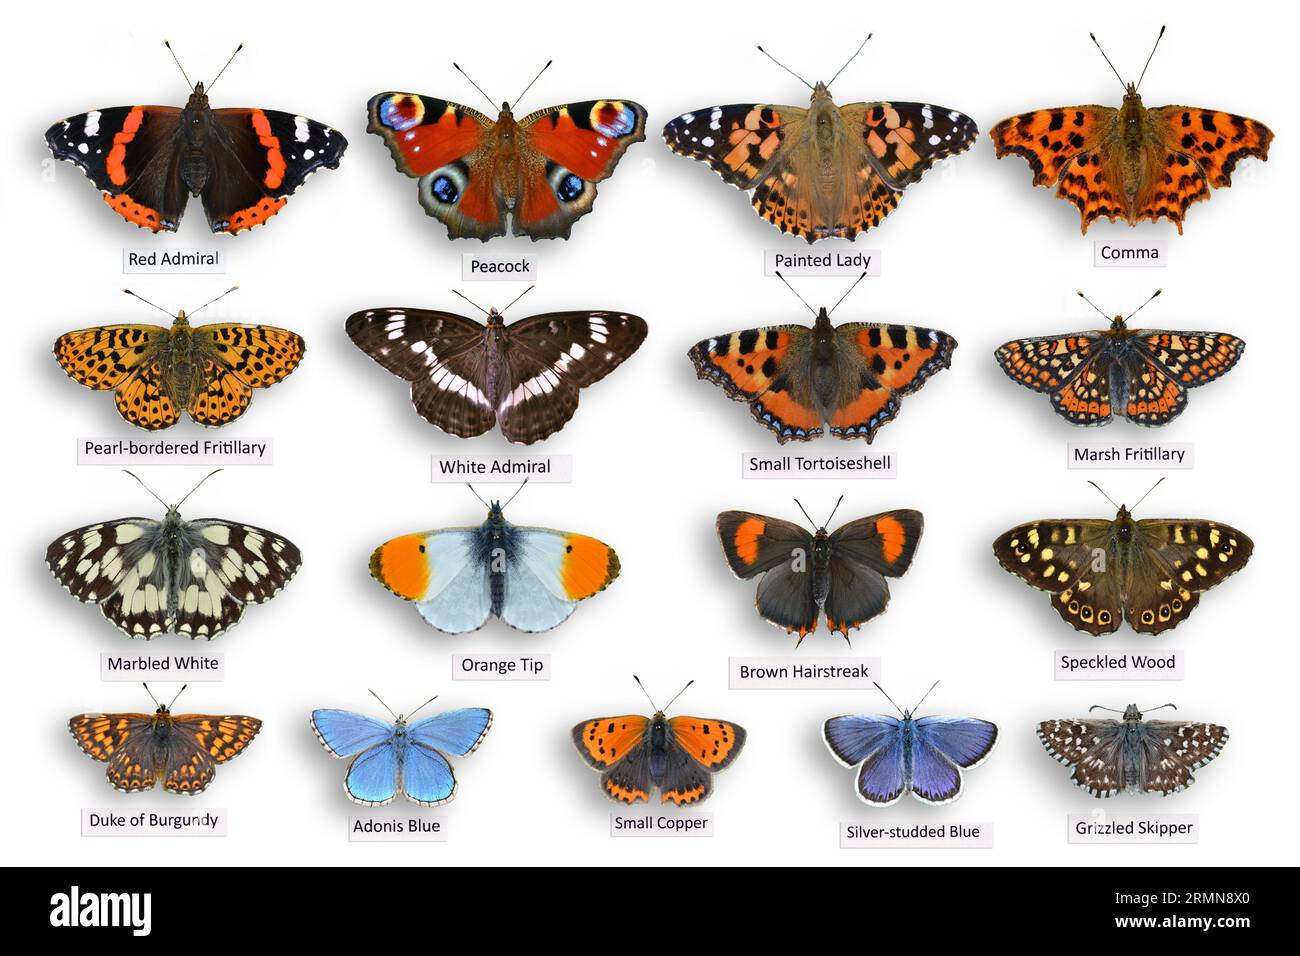 Virtual butterfly collection, from cut-outs of my own photographs with virtual labels and pins added. No butterflies were harmed! Stock Photo